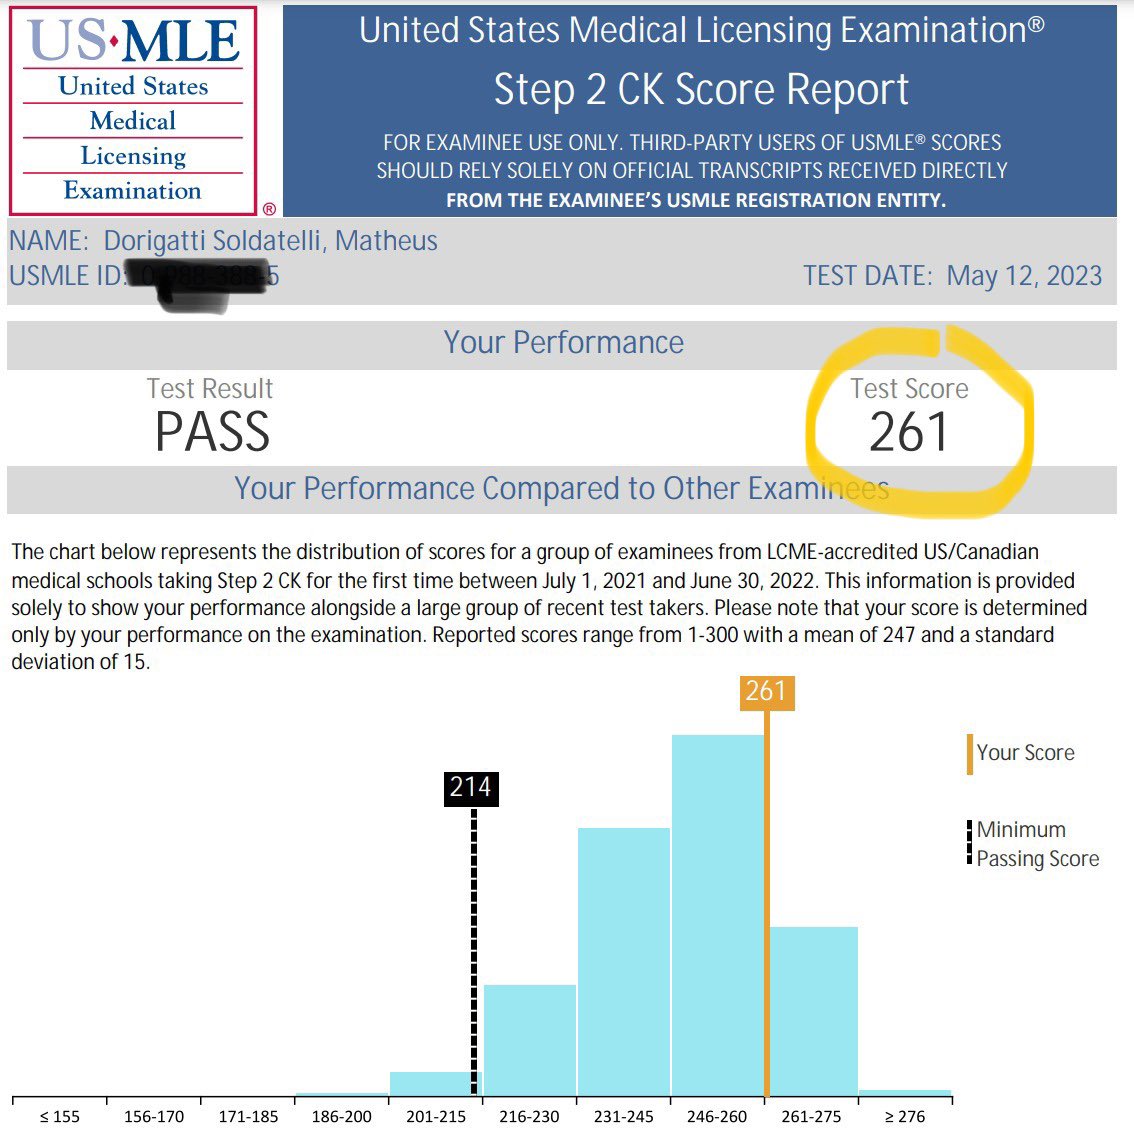 Less than 3 months apart from step 1, and more than 6 years after graduating from medschool. Thank u for all those who supported my decision! ⚕️😃 #usmle #step2